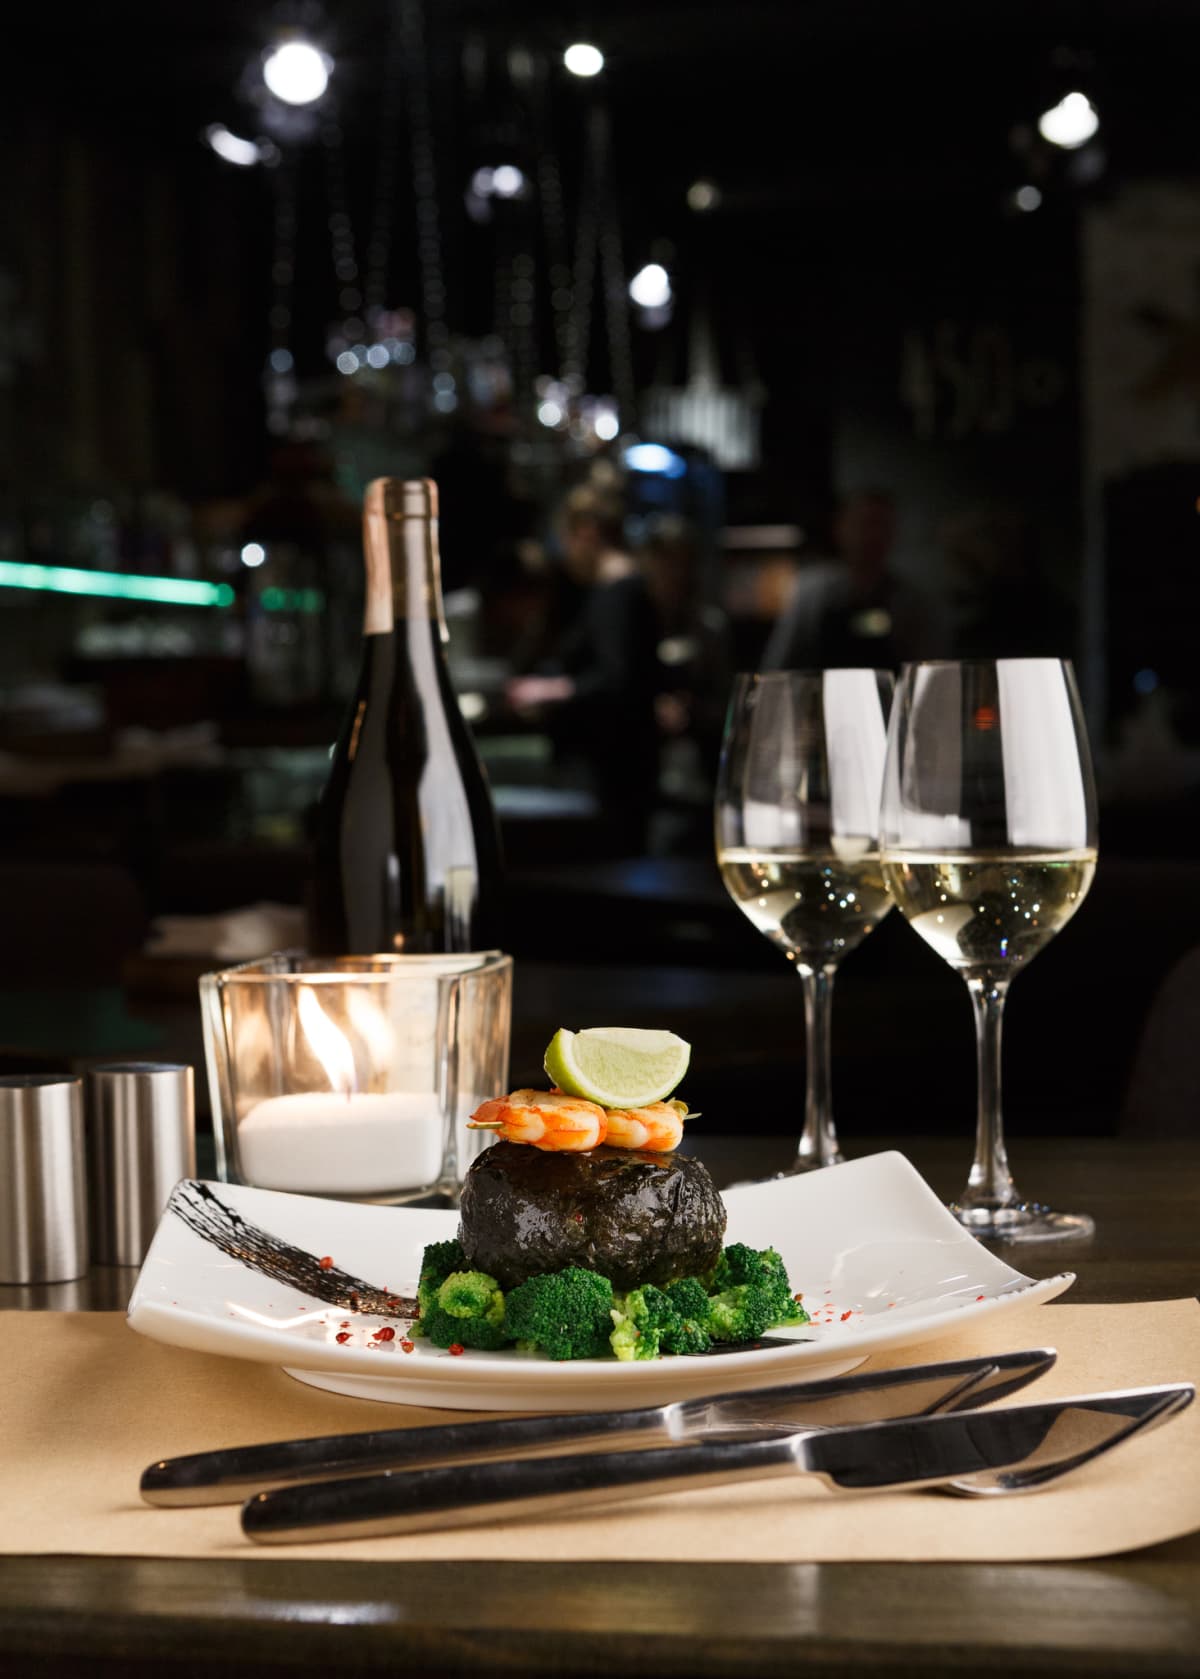 Wining and dining at restaurant. Dorado fillet wrapped in nori on steamed broccoli with shrimps and lemon piece. Table served with wine and fine cutlery for luxurious dinner. Gourmet cuisine meals